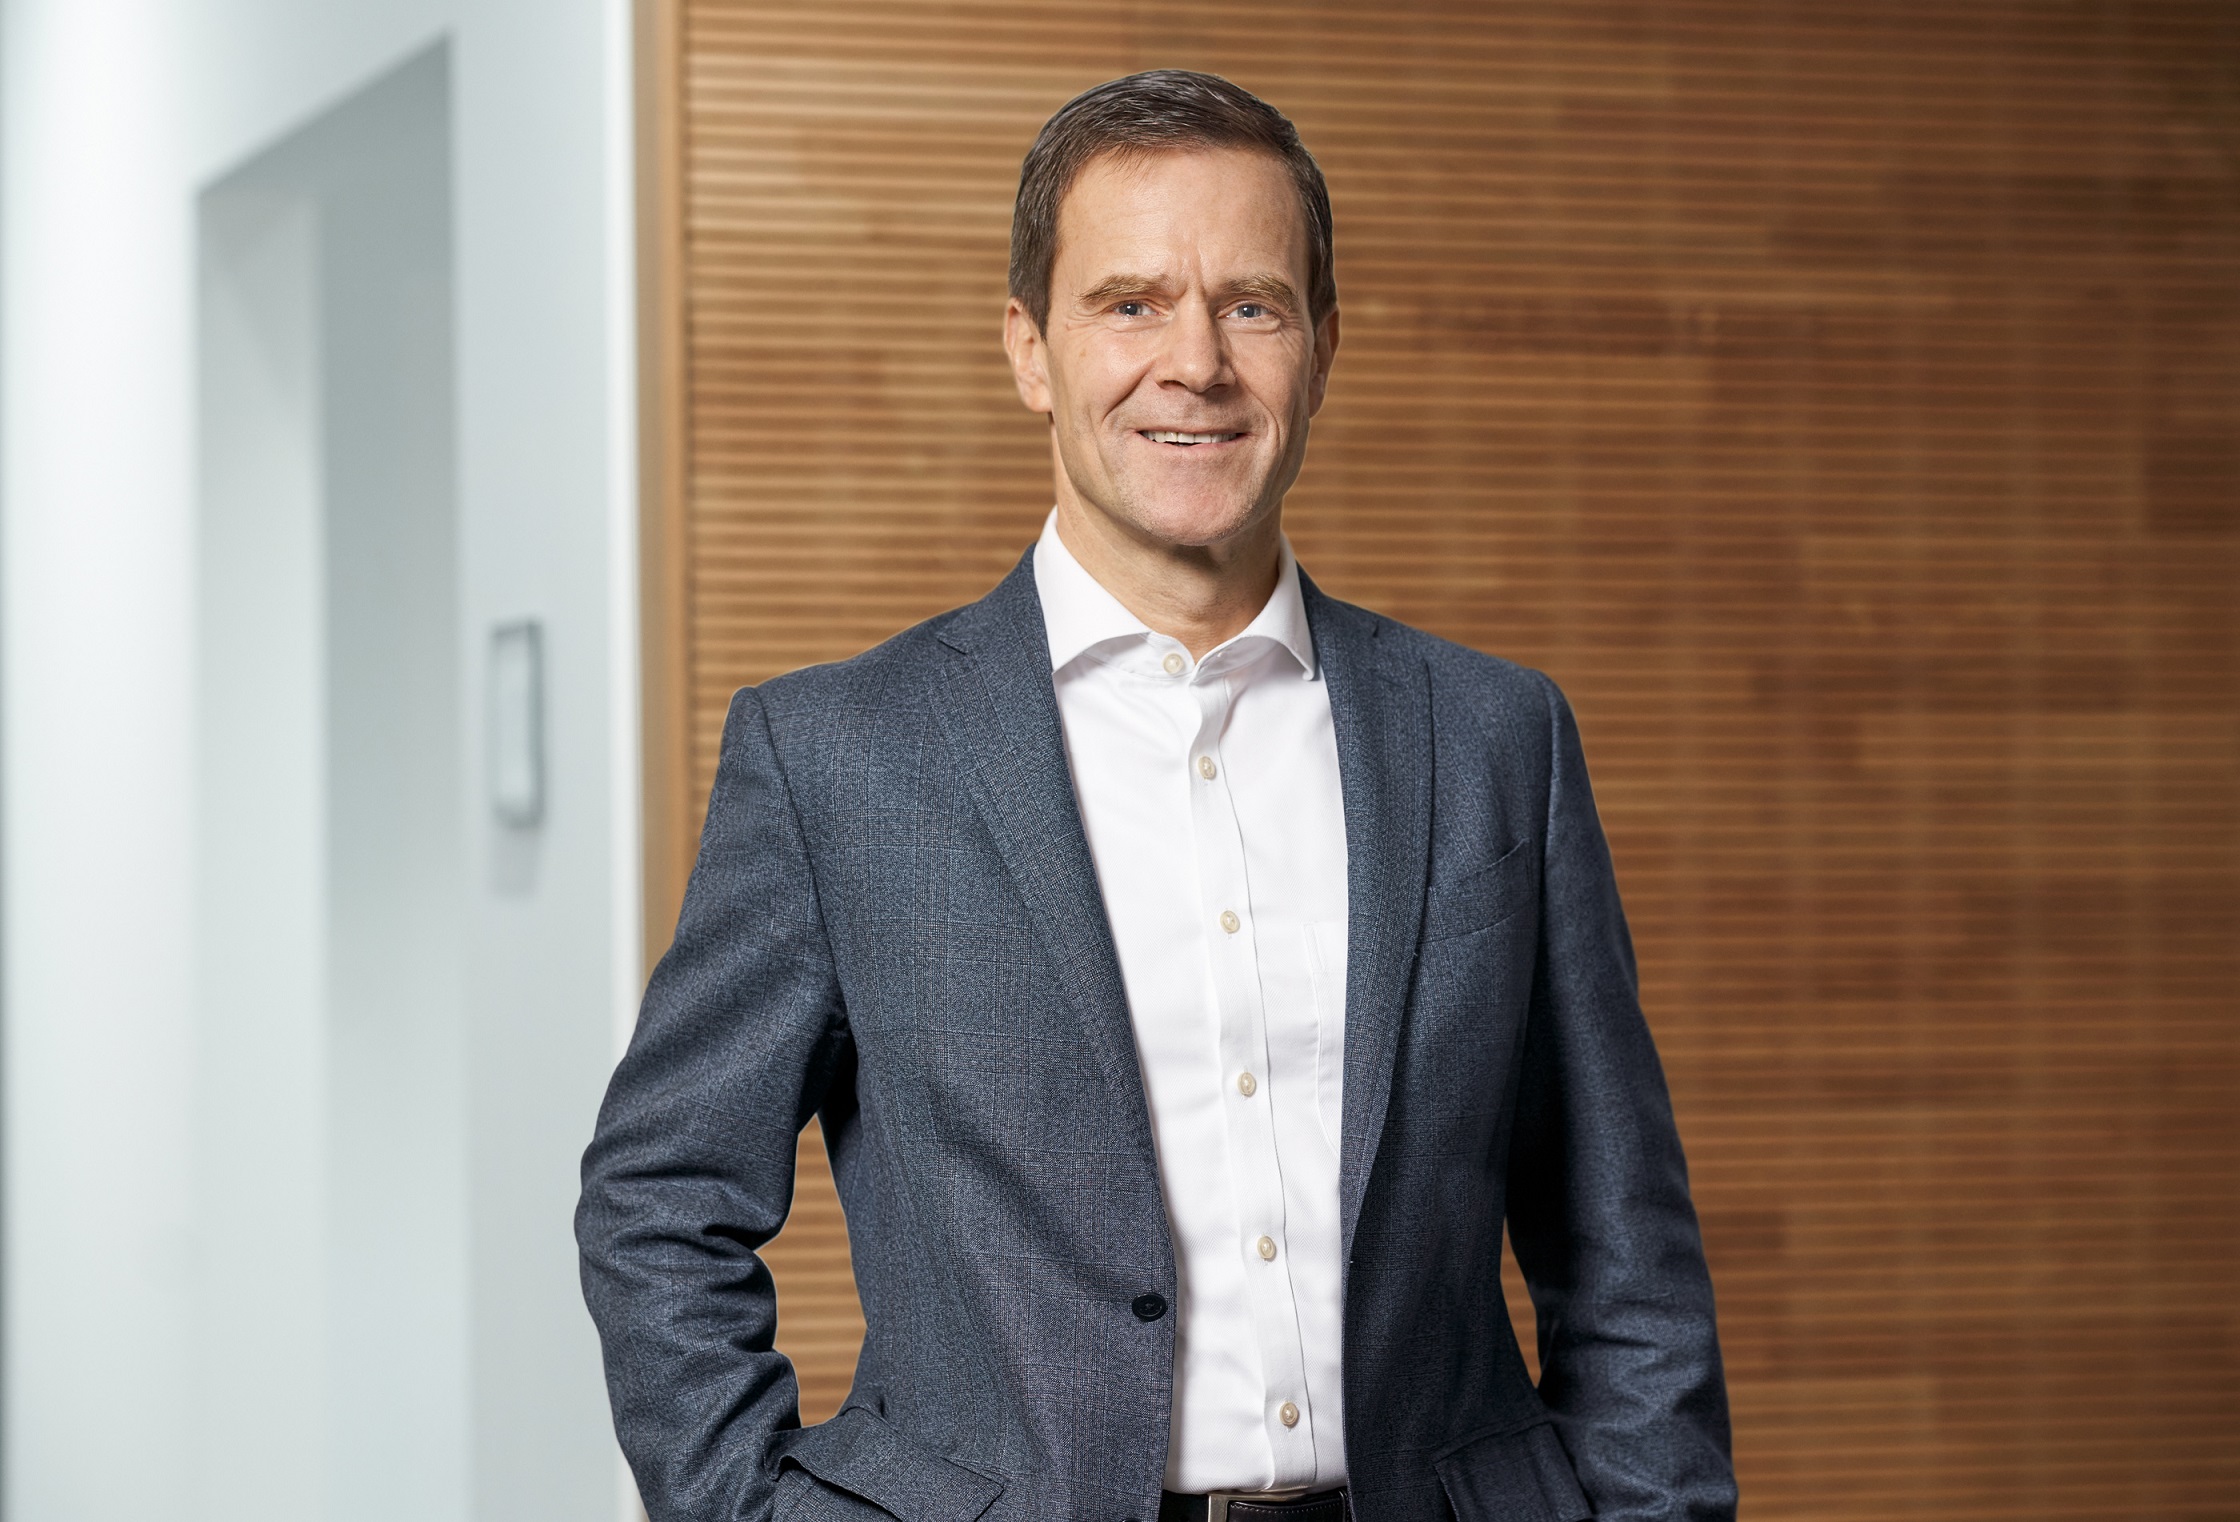 HeidelbergCement chairman Dominik von Achten says the CDP recognition underlines his company's global climate leadership